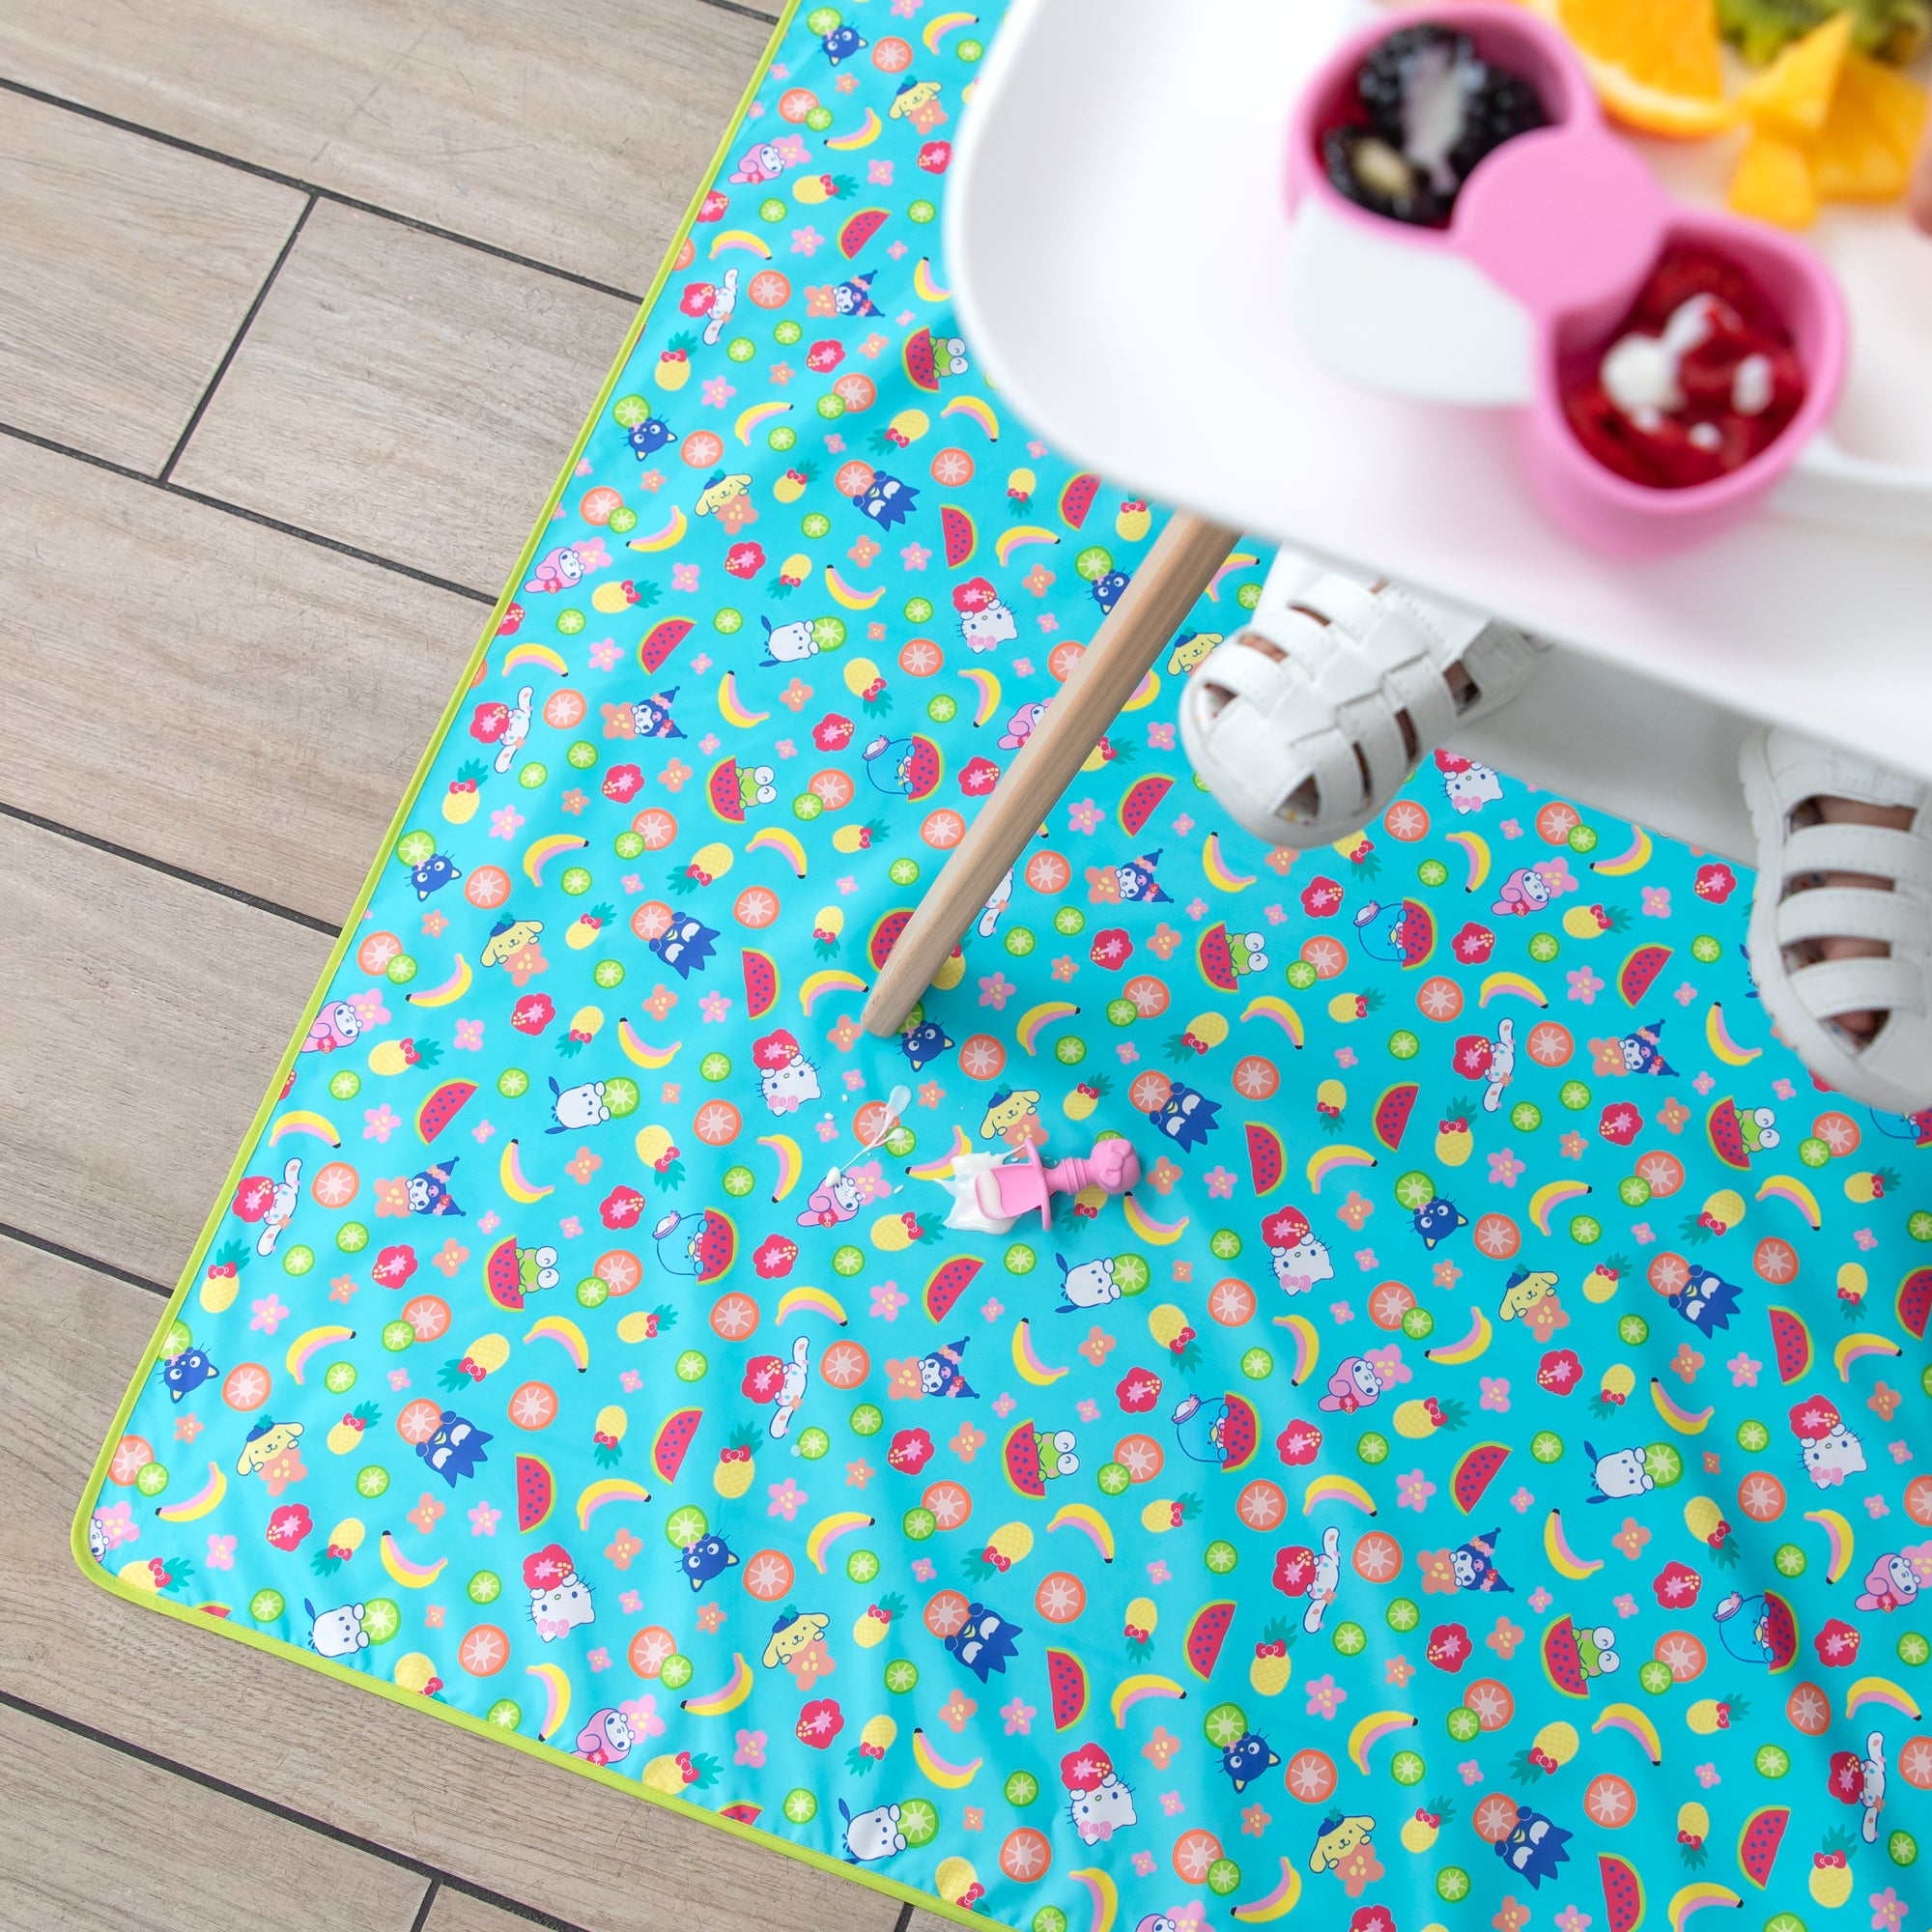  READY 2 LEARN Messy Mat - Splat Mat for Kids - Protect Tables  and Floors - Waterproof - Reusable and Lightweight - 60”L x 60”W : Baby